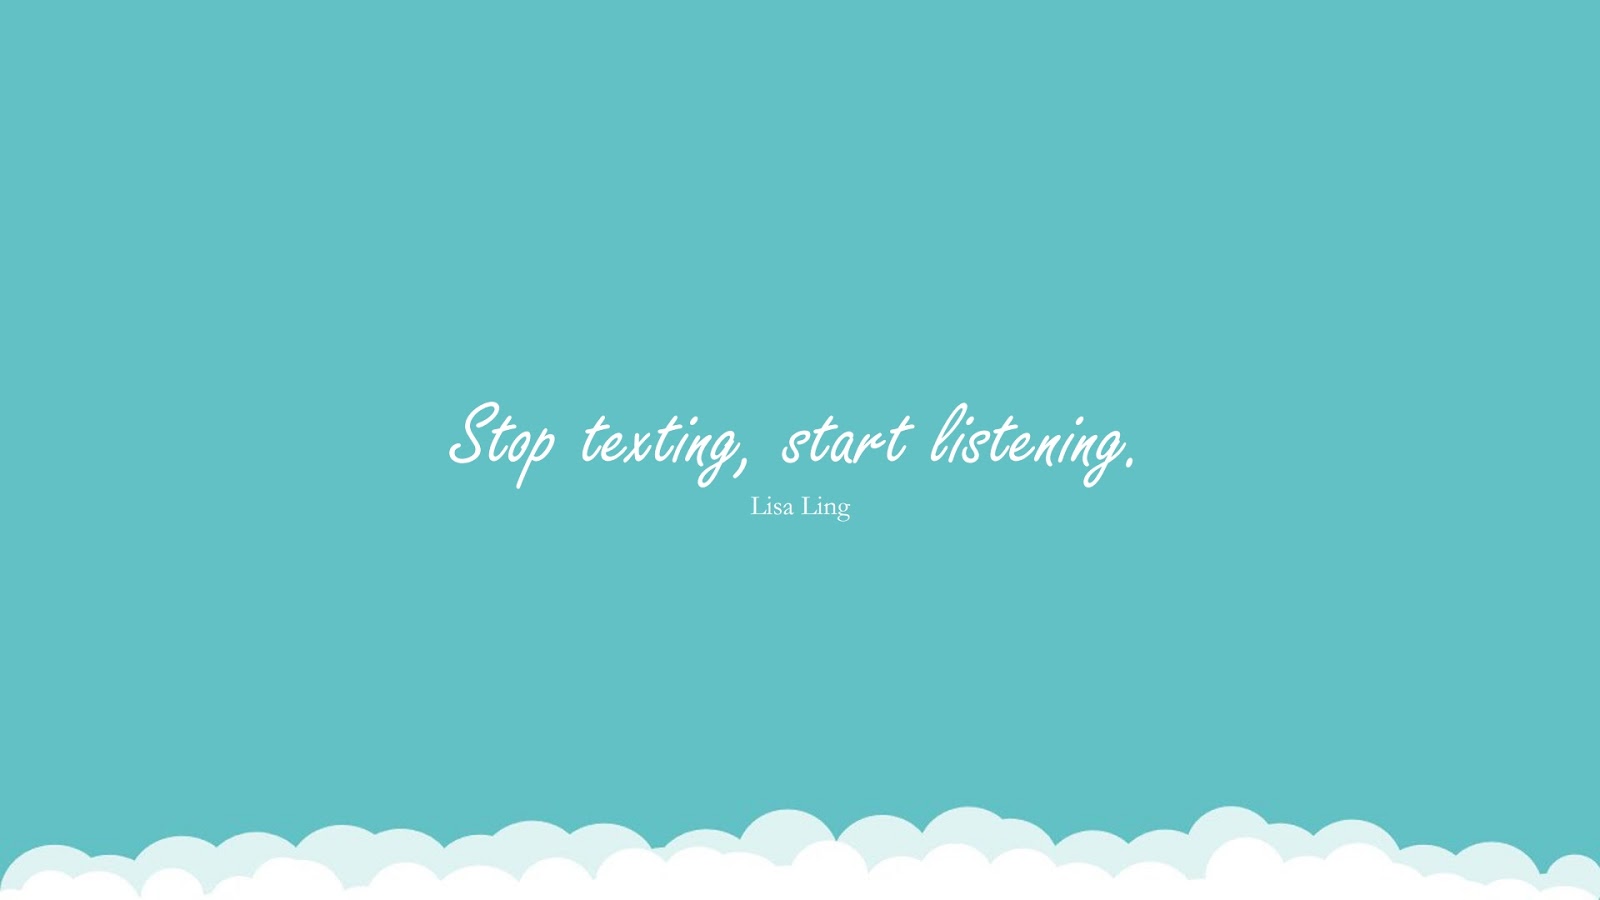 Stop texting, start listening. (Lisa Ling);  #DepressionQuotes